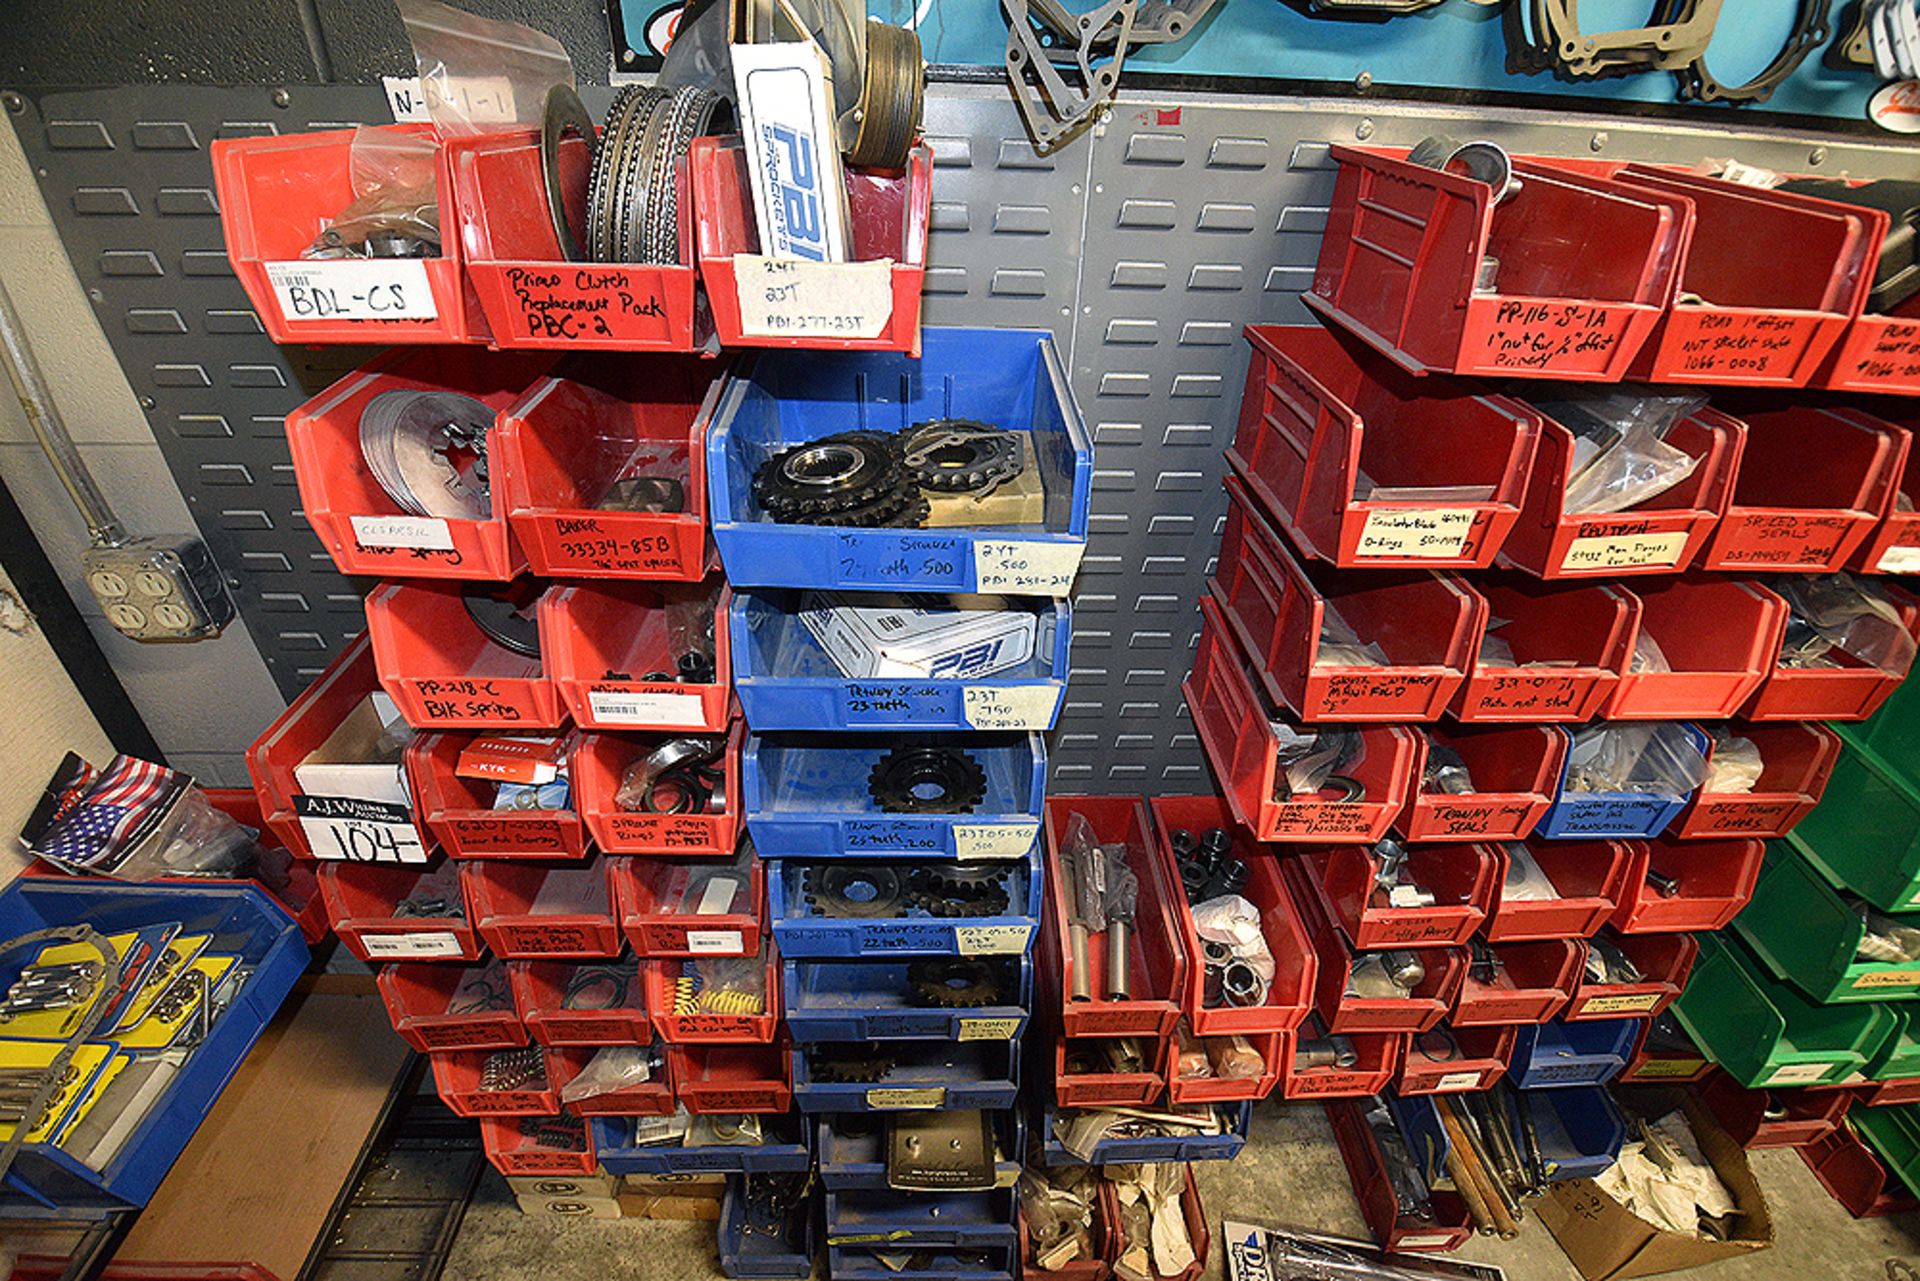 {LOT} Brake Lines, Bearings, S&S Parts, Carbs, Throttle Body w/ Organizer Bins - Image 2 of 4